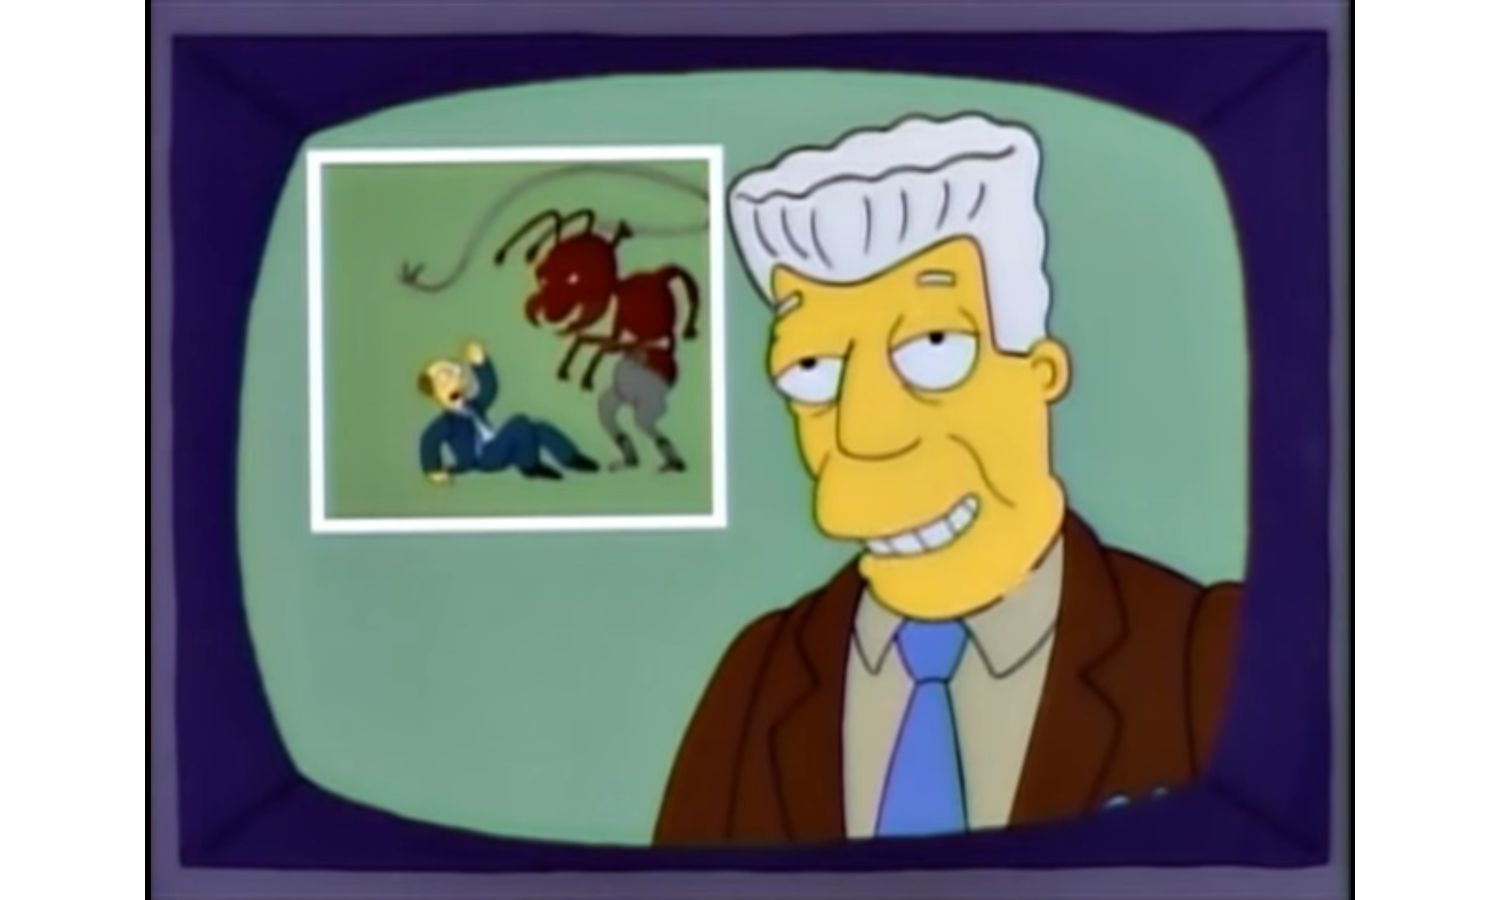 An image showing an episode of the Simpsons where ants take over to illustrate red fire ants aggressive approach.